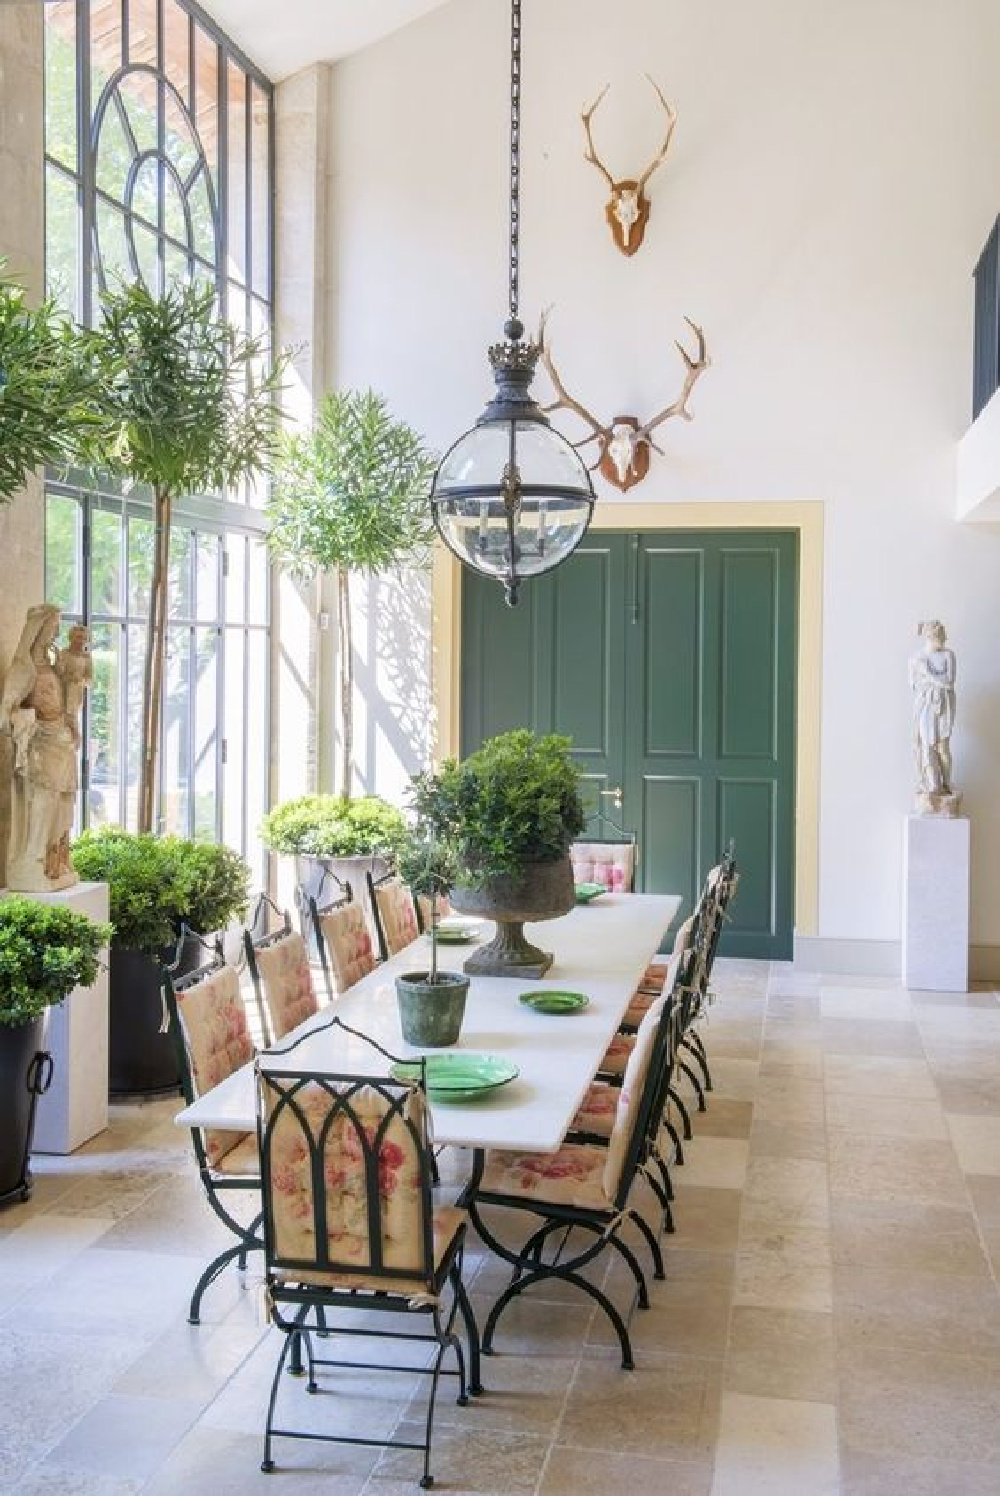 Dining area in Le Mas des Poiriers - see more in PROVENCE STYLE (@vendomepress) and @provencepoiriers. #frenchfarmhouse #oldworldstyle #frenchdiningroom